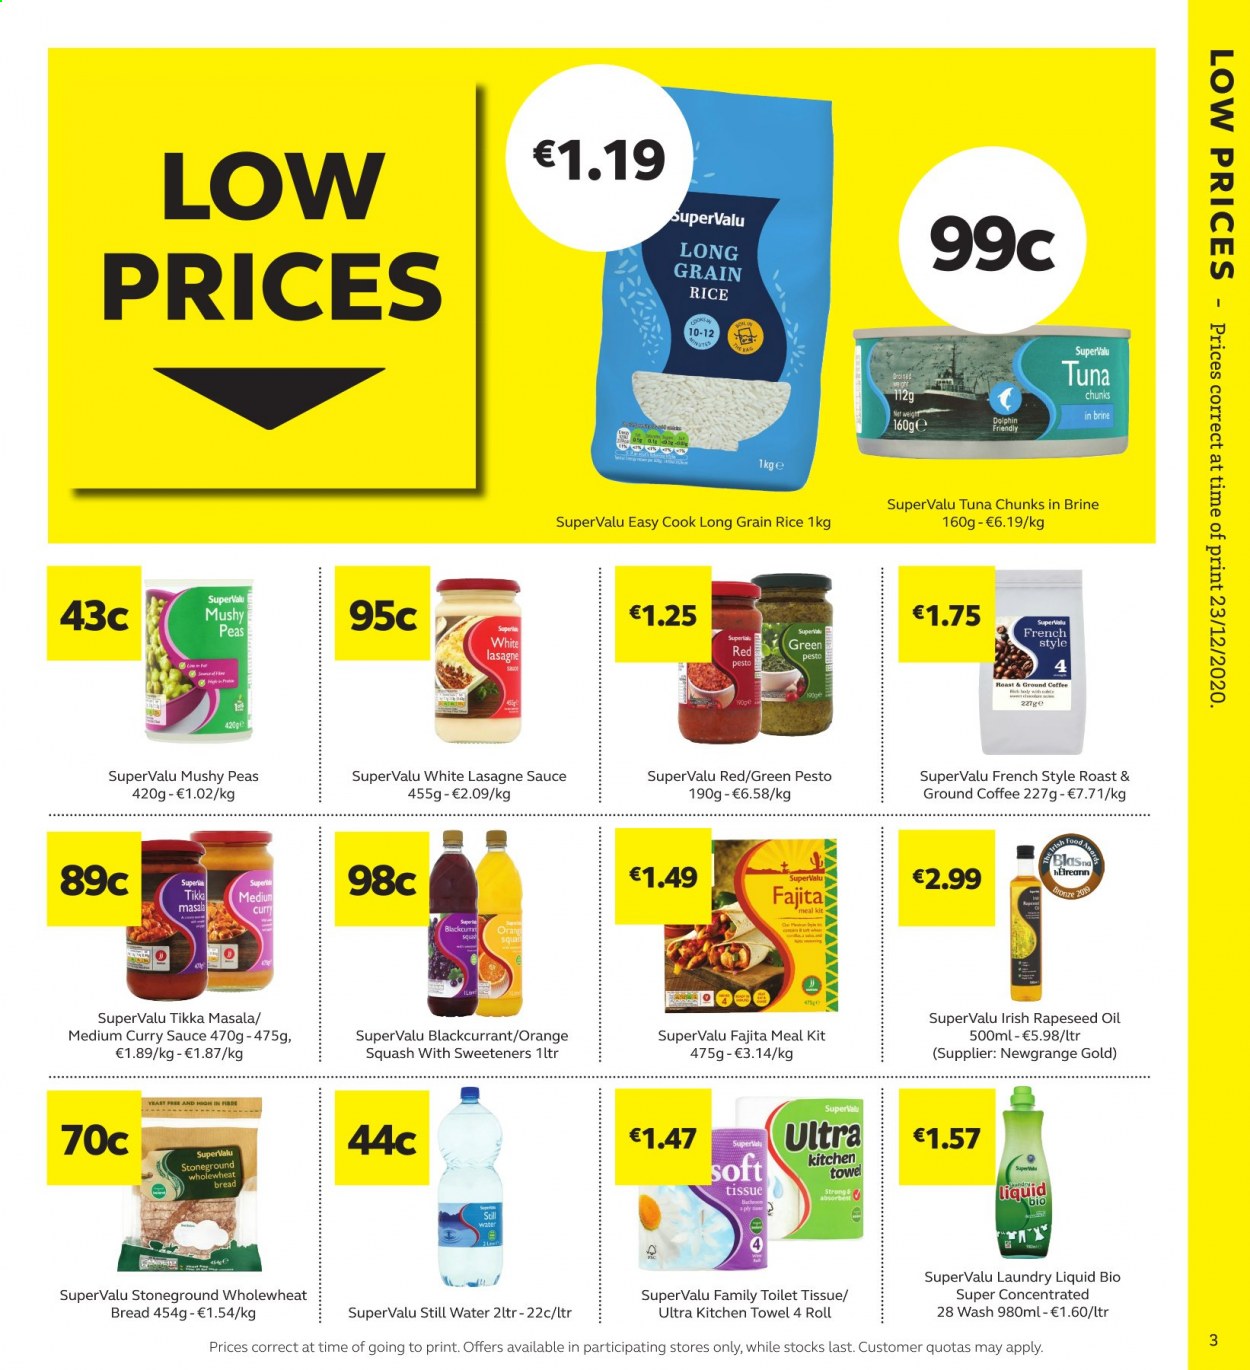 thumbnail - SuperValu offer  - 21.01.2021 - 03.02.2021 - Sales products - bread, peas, tuna, sauce, fajita, yeast, lasagne sheets, rice, whole grain rice, long grain rice, Tikka Masala, pesto, oil, mineral water, coffee, ground coffee, toilet paper, tissues, kitchen towels, laundry detergent. Page 3.